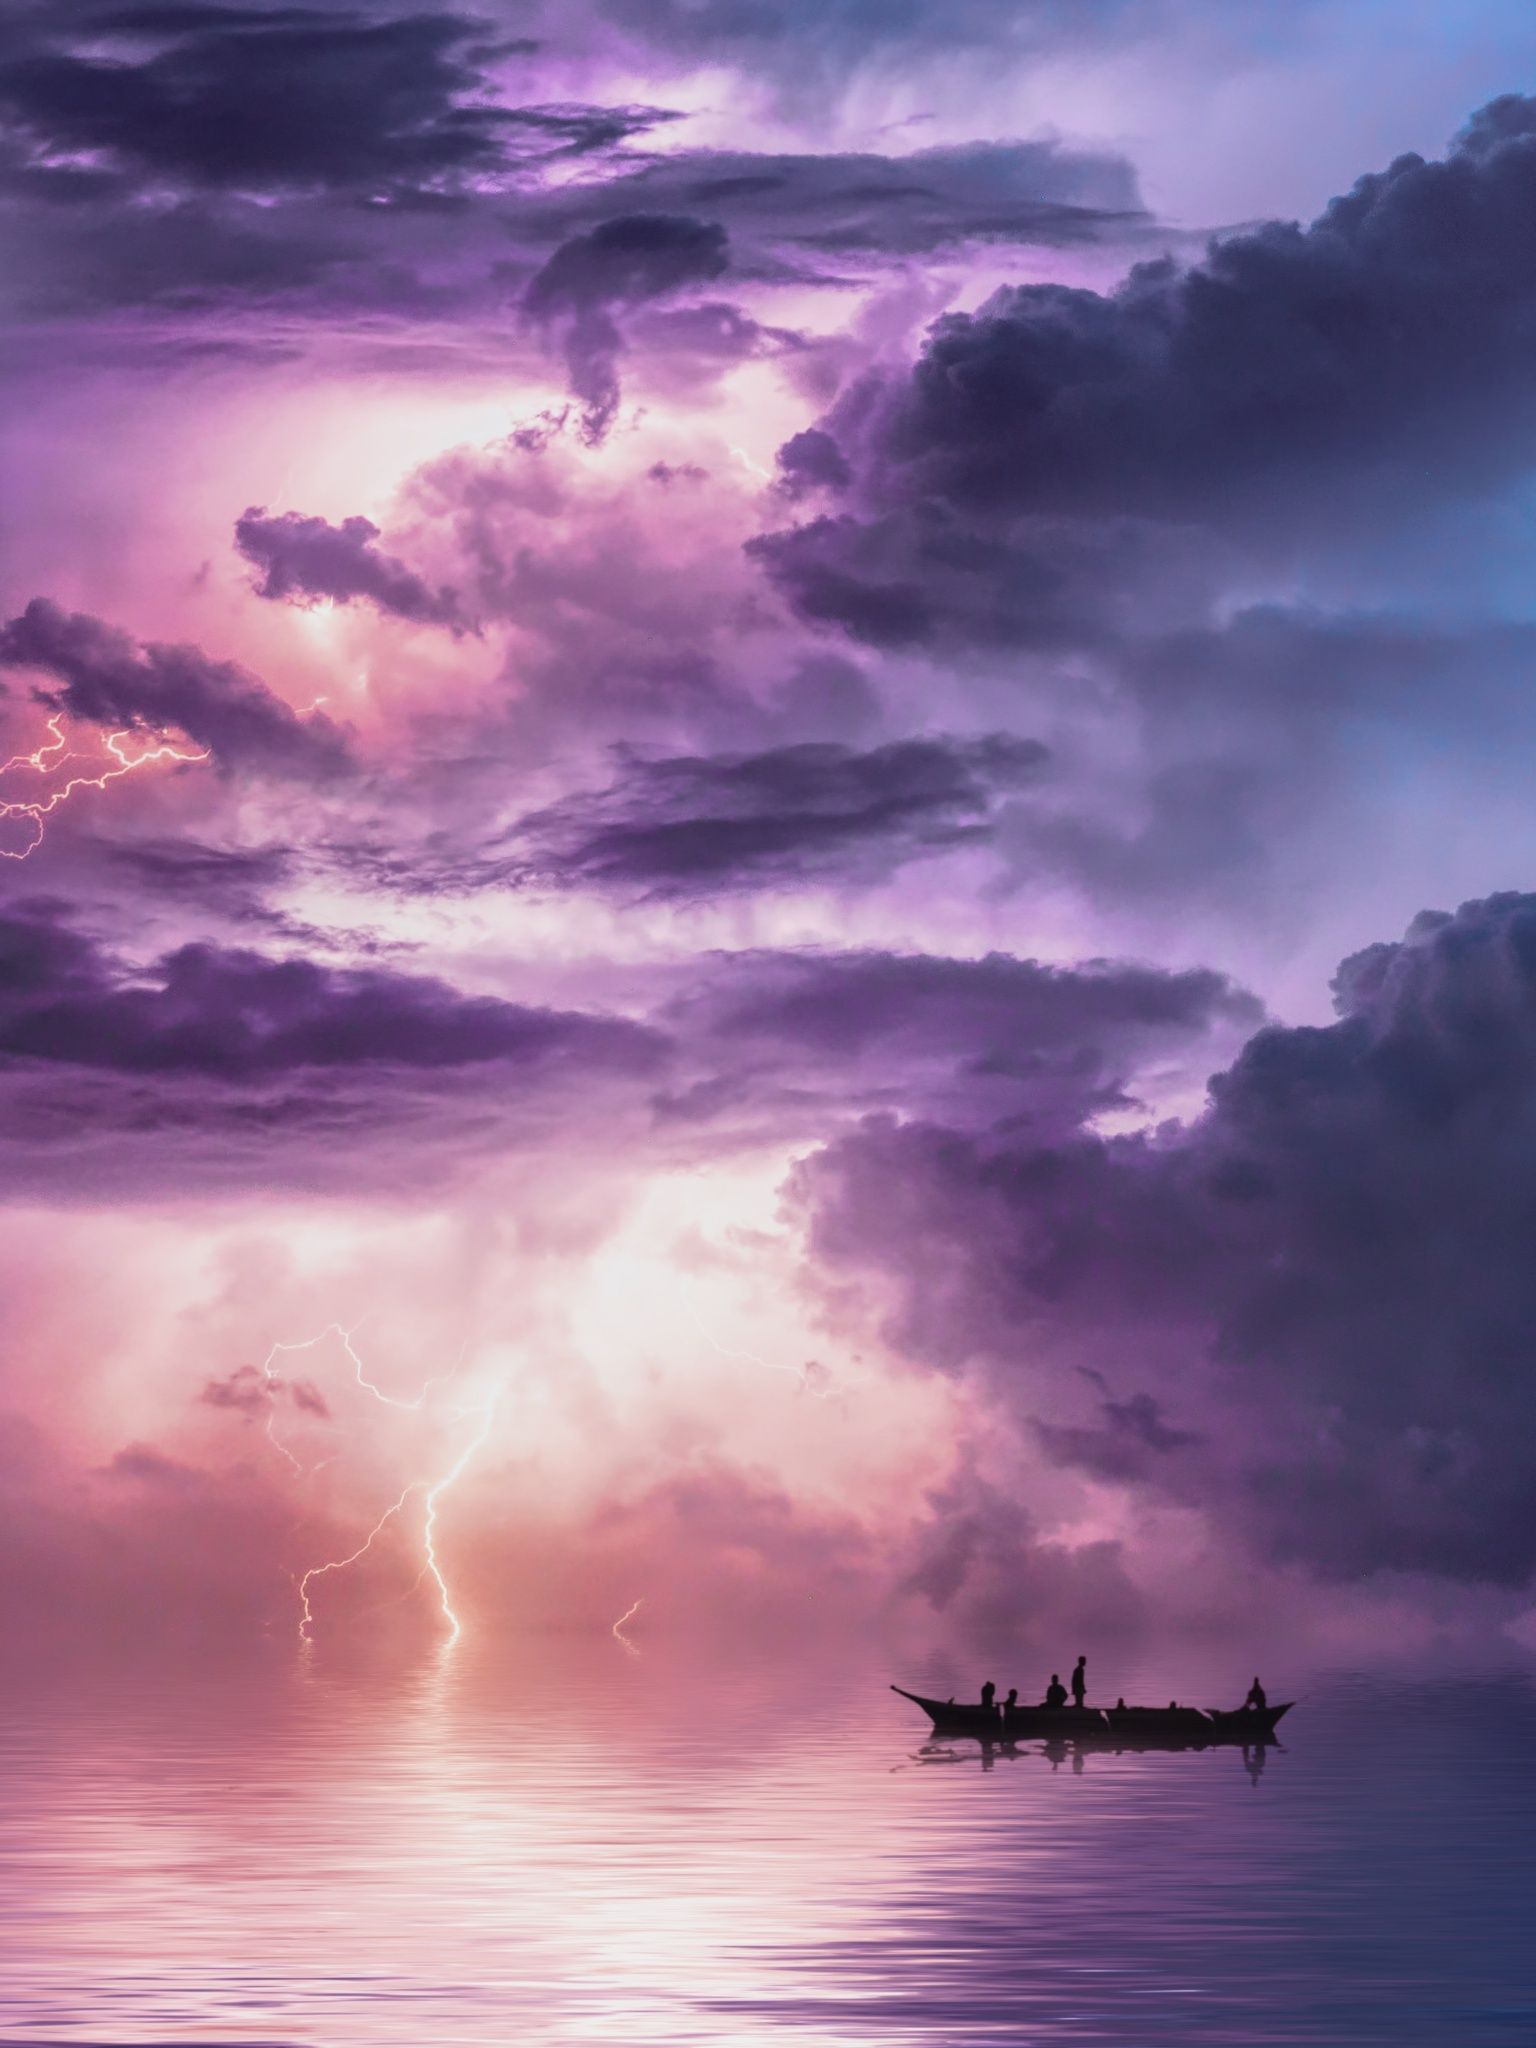 A boat with three people on it floating on a body of water with a purple and blue cloudy sky above. - Storm